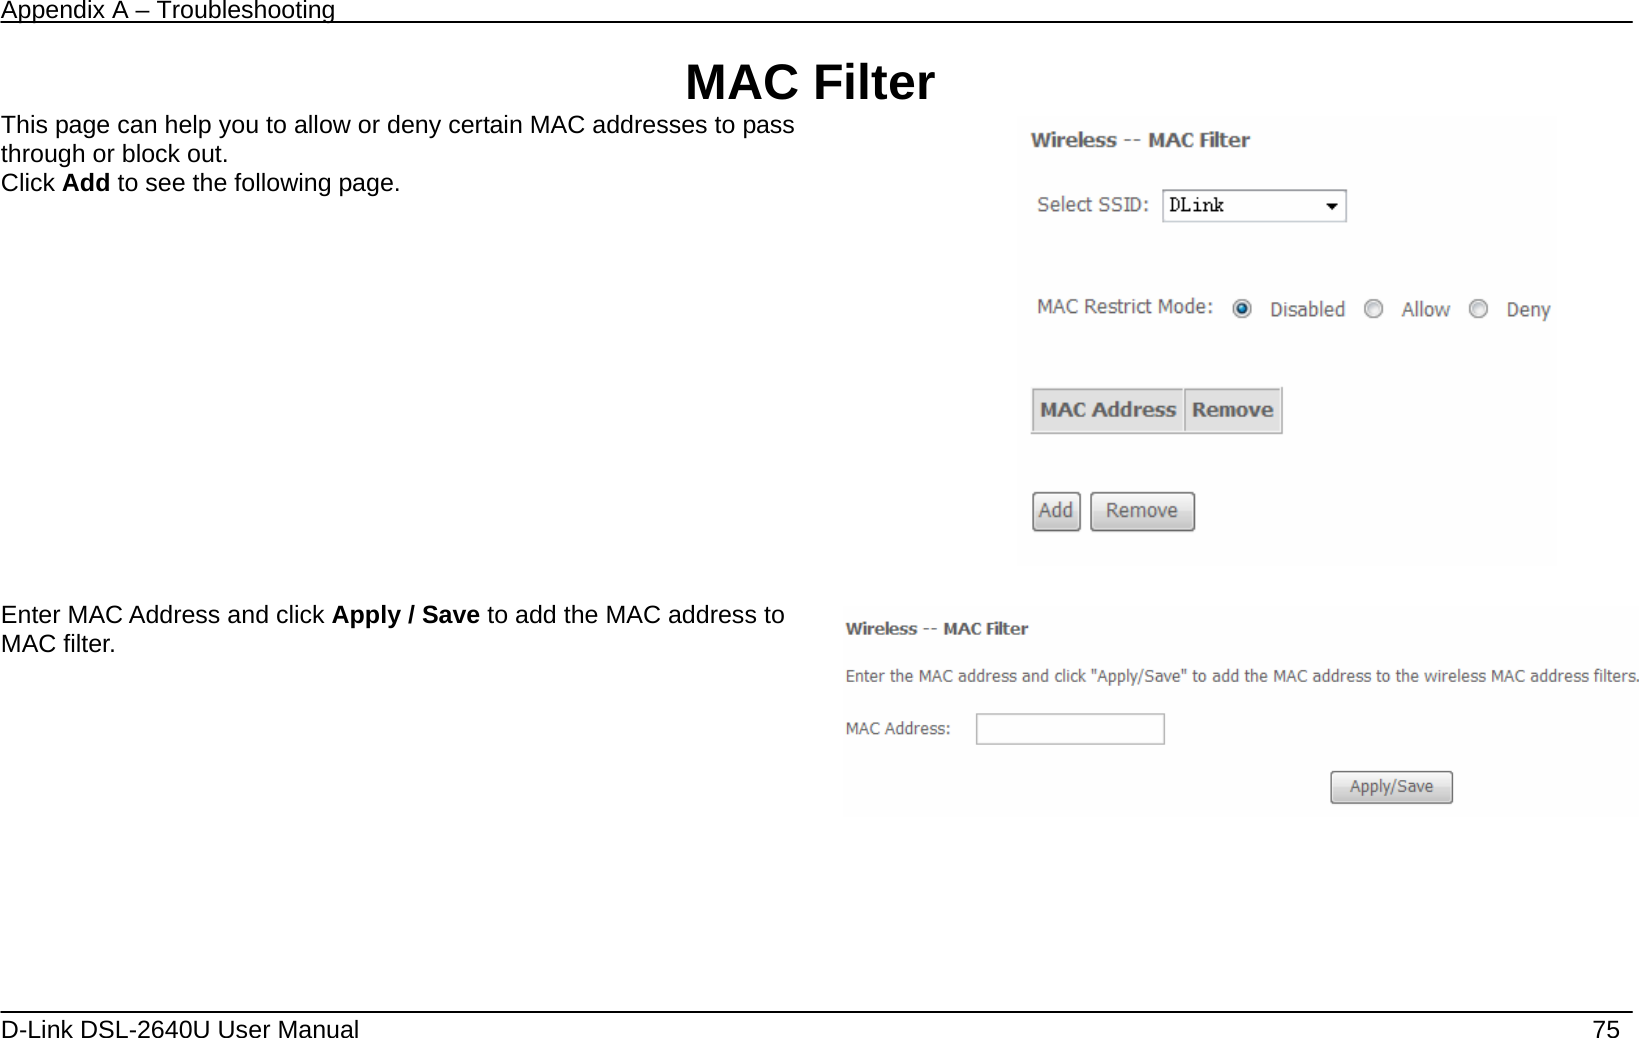 Appendix A – Troubleshooting   D-Link DSL-2640U User Manual    75 MAC Filter This page can help you to allow or deny certain MAC addresses to pass through or block out. Click Add to see the following page.    Enter MAC Address and click Apply / Save to add the MAC address to MAC filter.       